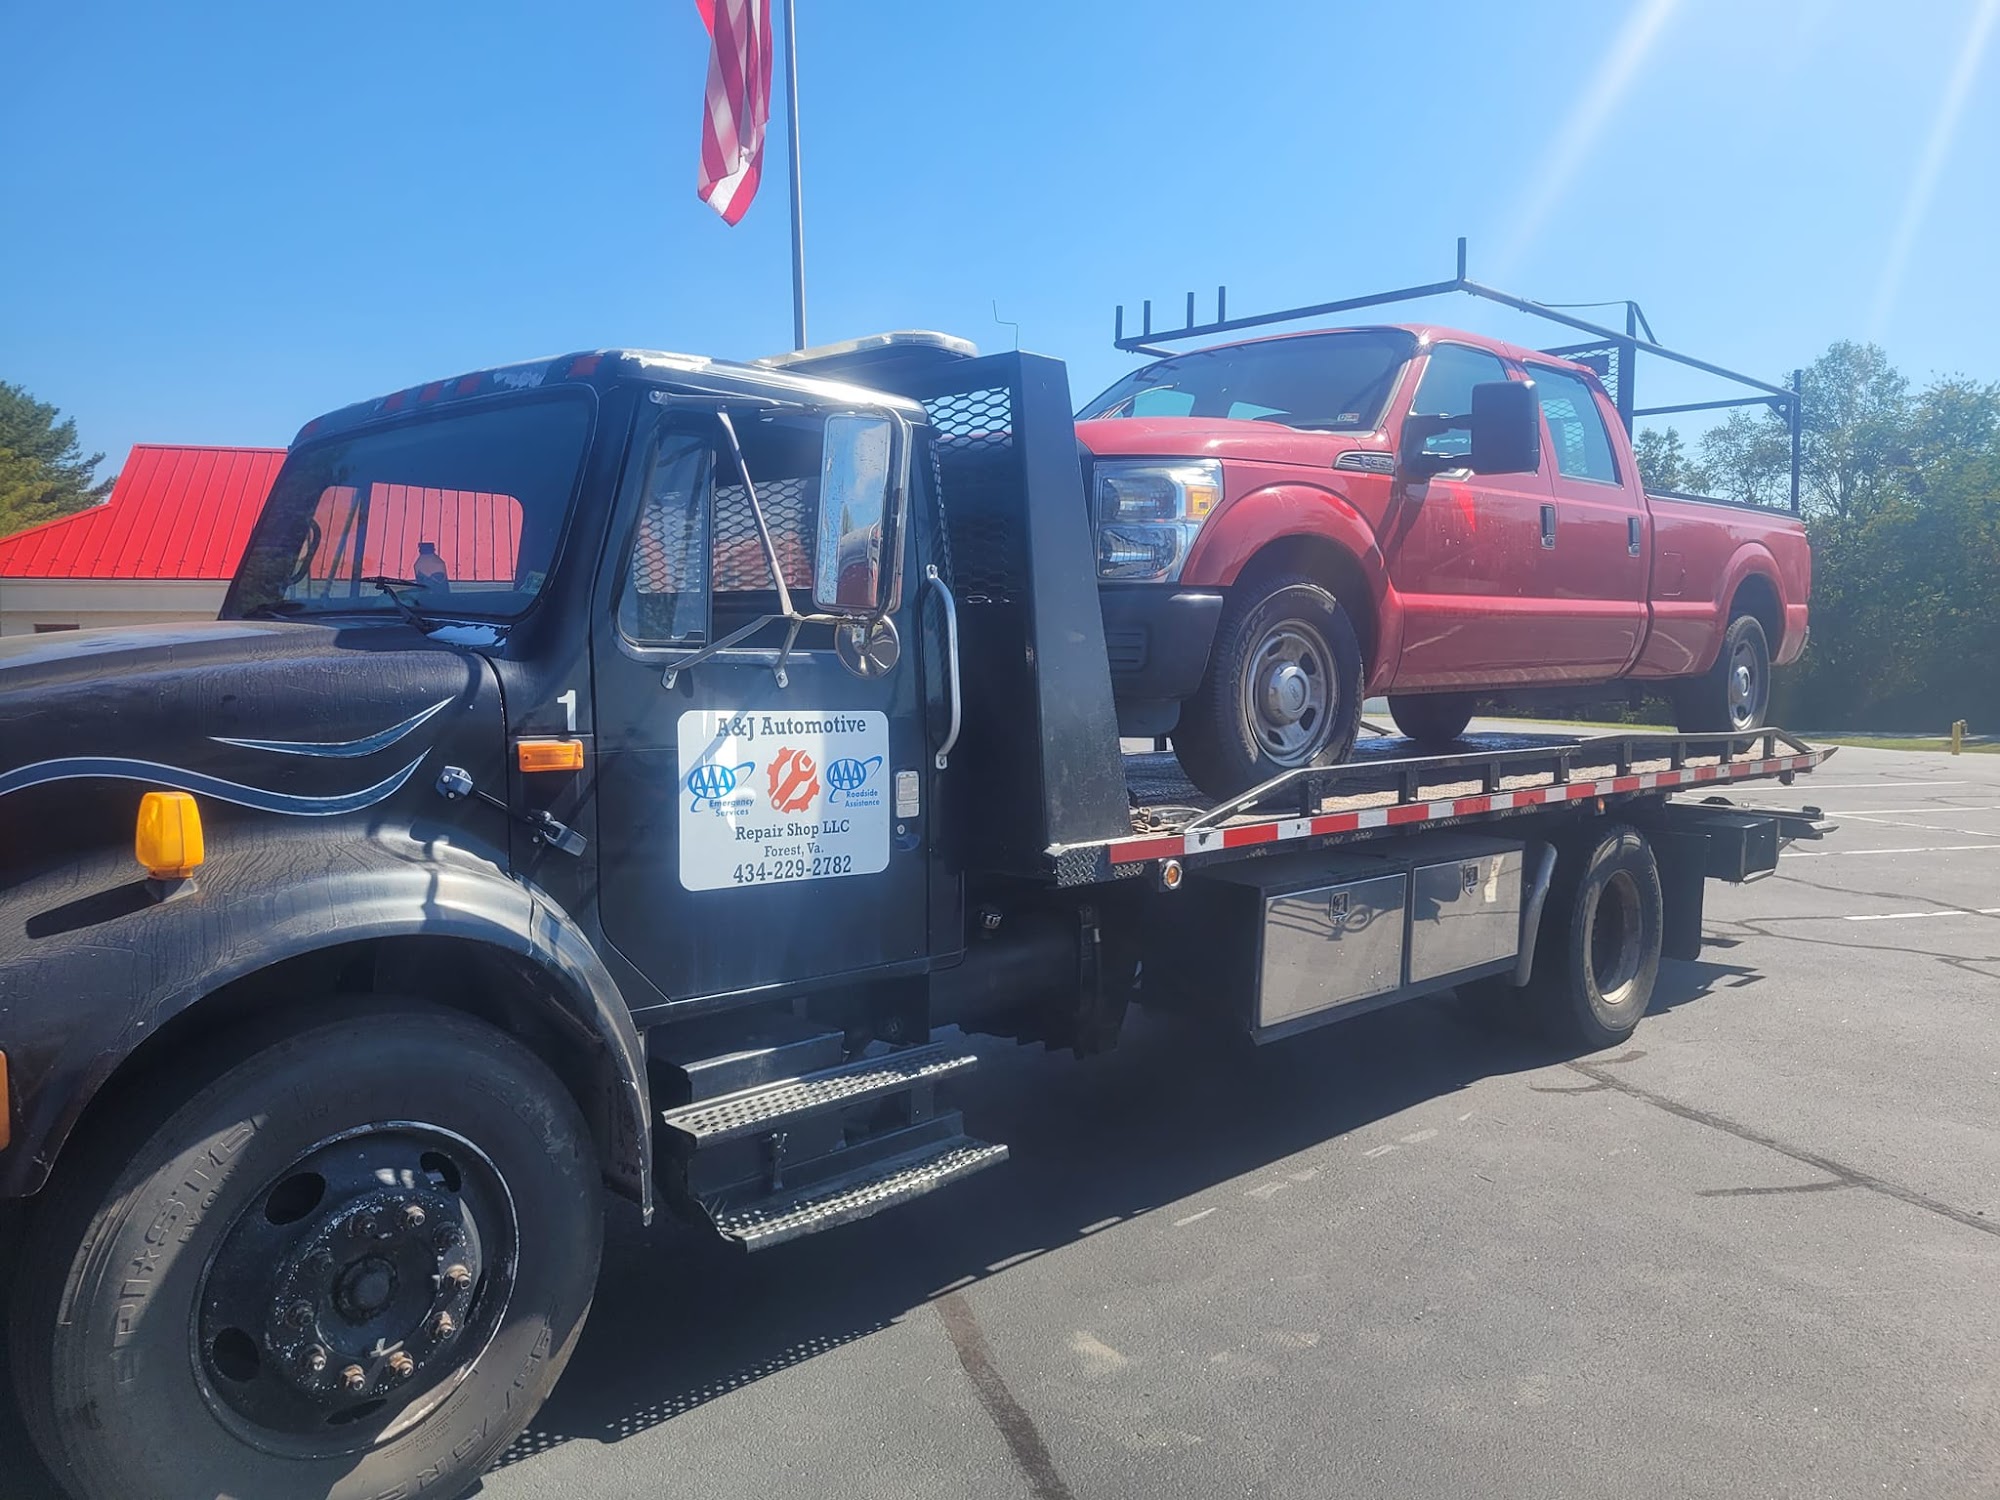 A&J Automotive Repair & Towing 128 Old Town Connector, Madison Heights Virginia 24572